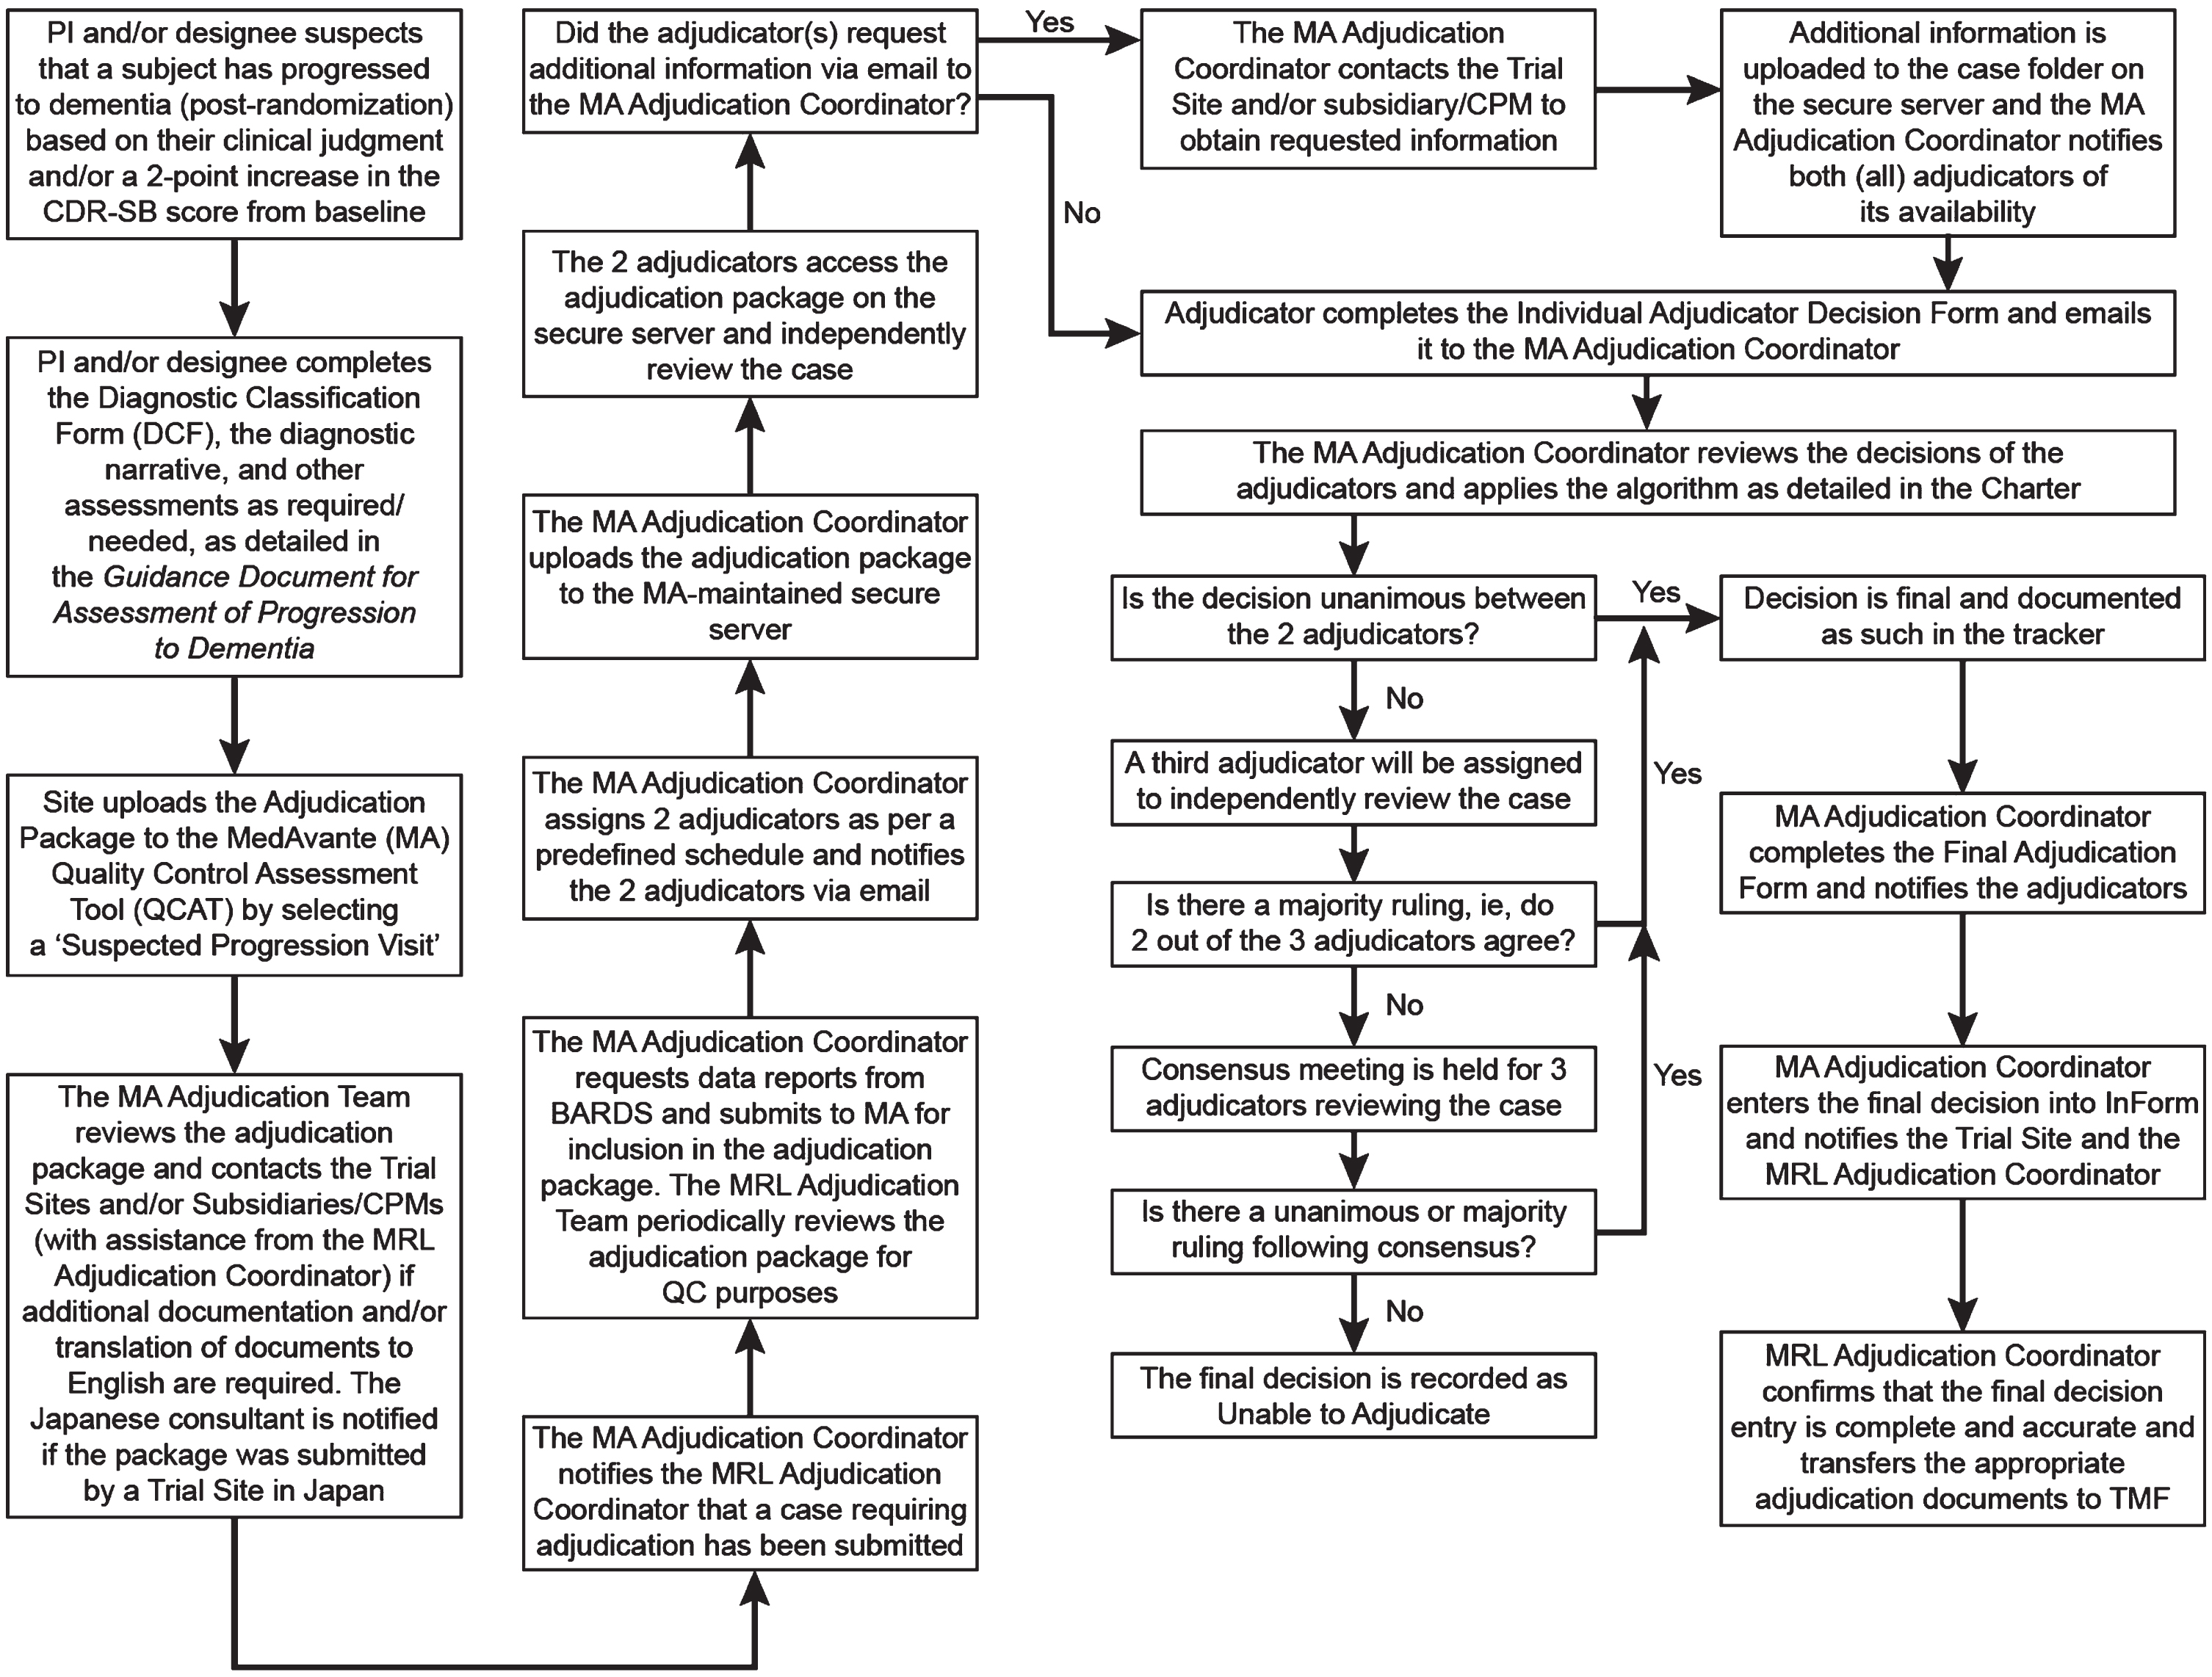 General process of the adjudication of progression to dementia in the verubecestat prodromal AD study. BARDS, Biostatistics and Research Decision Sciences (MSD’s statistics group); CDR-SB, Clinical Dementia Rating Sum-of-Boxes; CPM, Clinical Project Manager; DCF, Diagnostic Classification Form; MA, MedAvante (Contract Research Organization involved in the adjudication process); PI, Primary (Site) Investigator; QCAT, Quality Control Assessment Tool; MRL, MSD Research Laboratories (the study sponsor); QC, Quality Control; TMF, Trial Master File